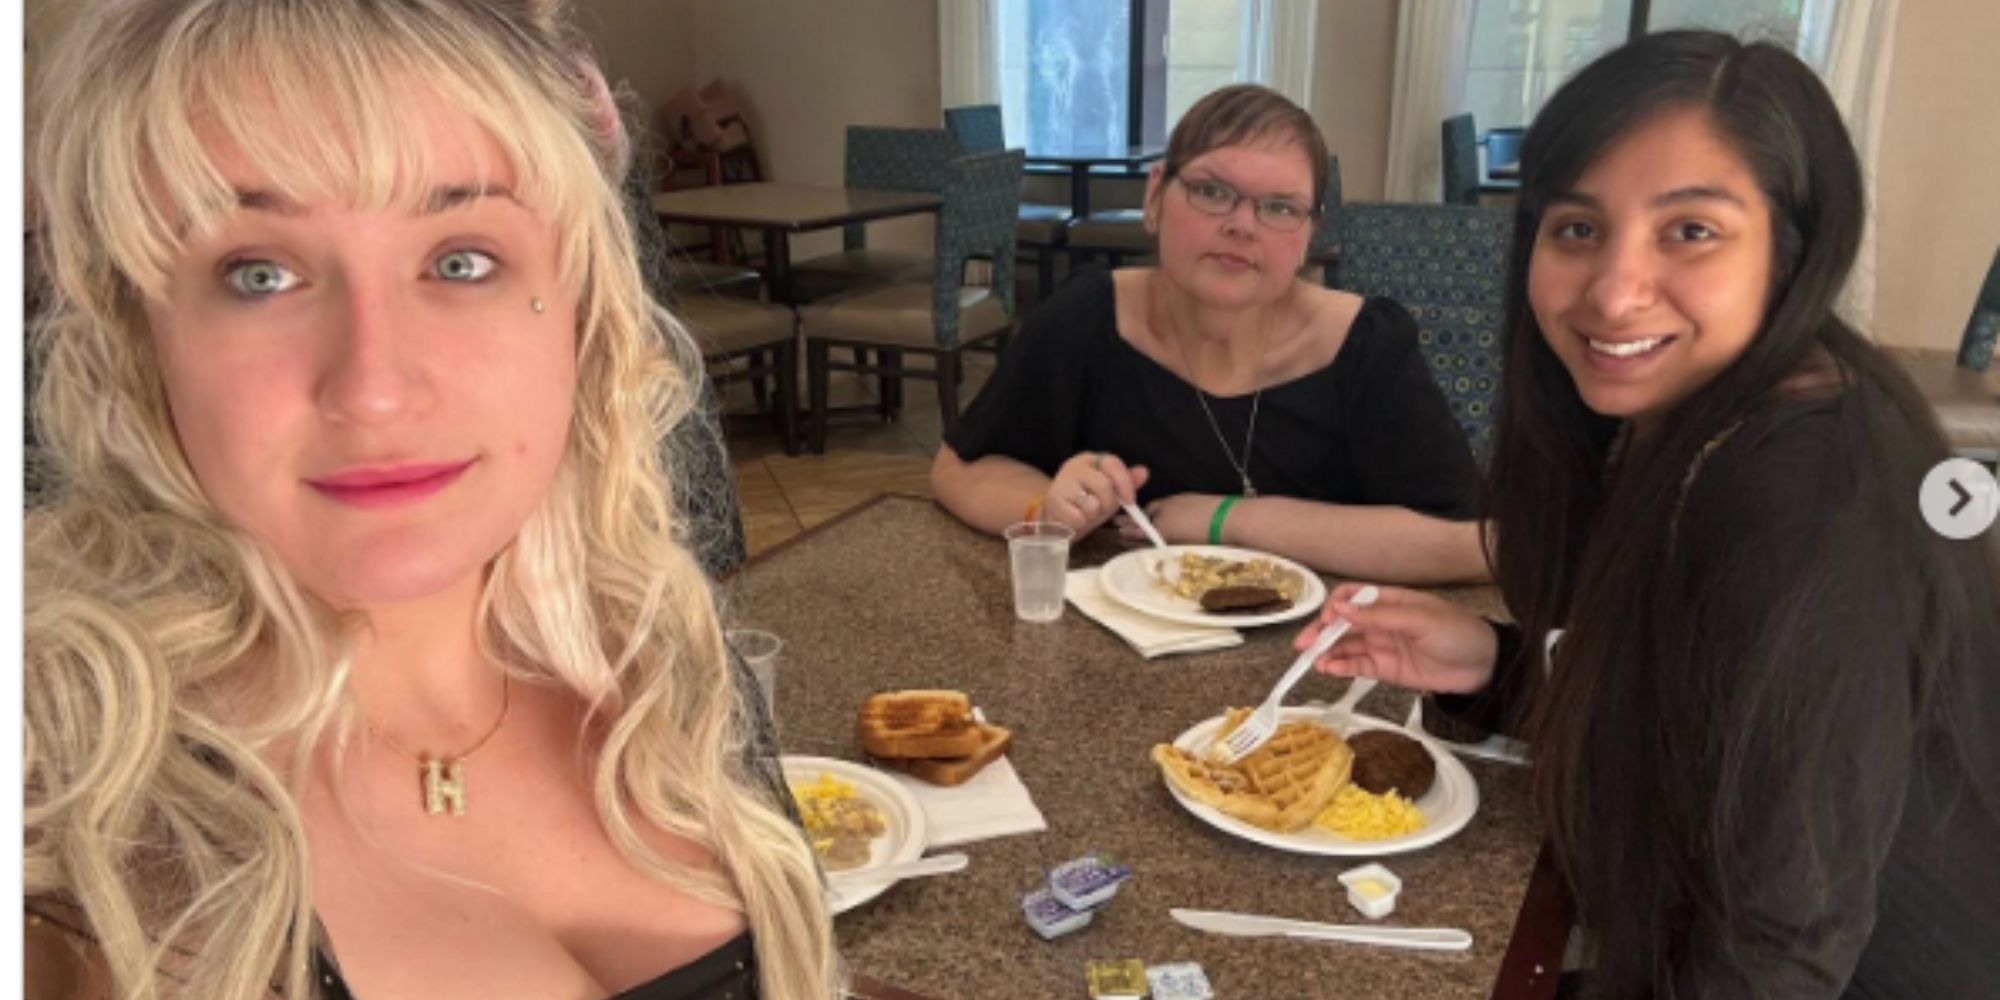 1000-lb Sisters' Tammy Slaton, Haley Michelle & Paola at breakfast at a hotel cafeteria